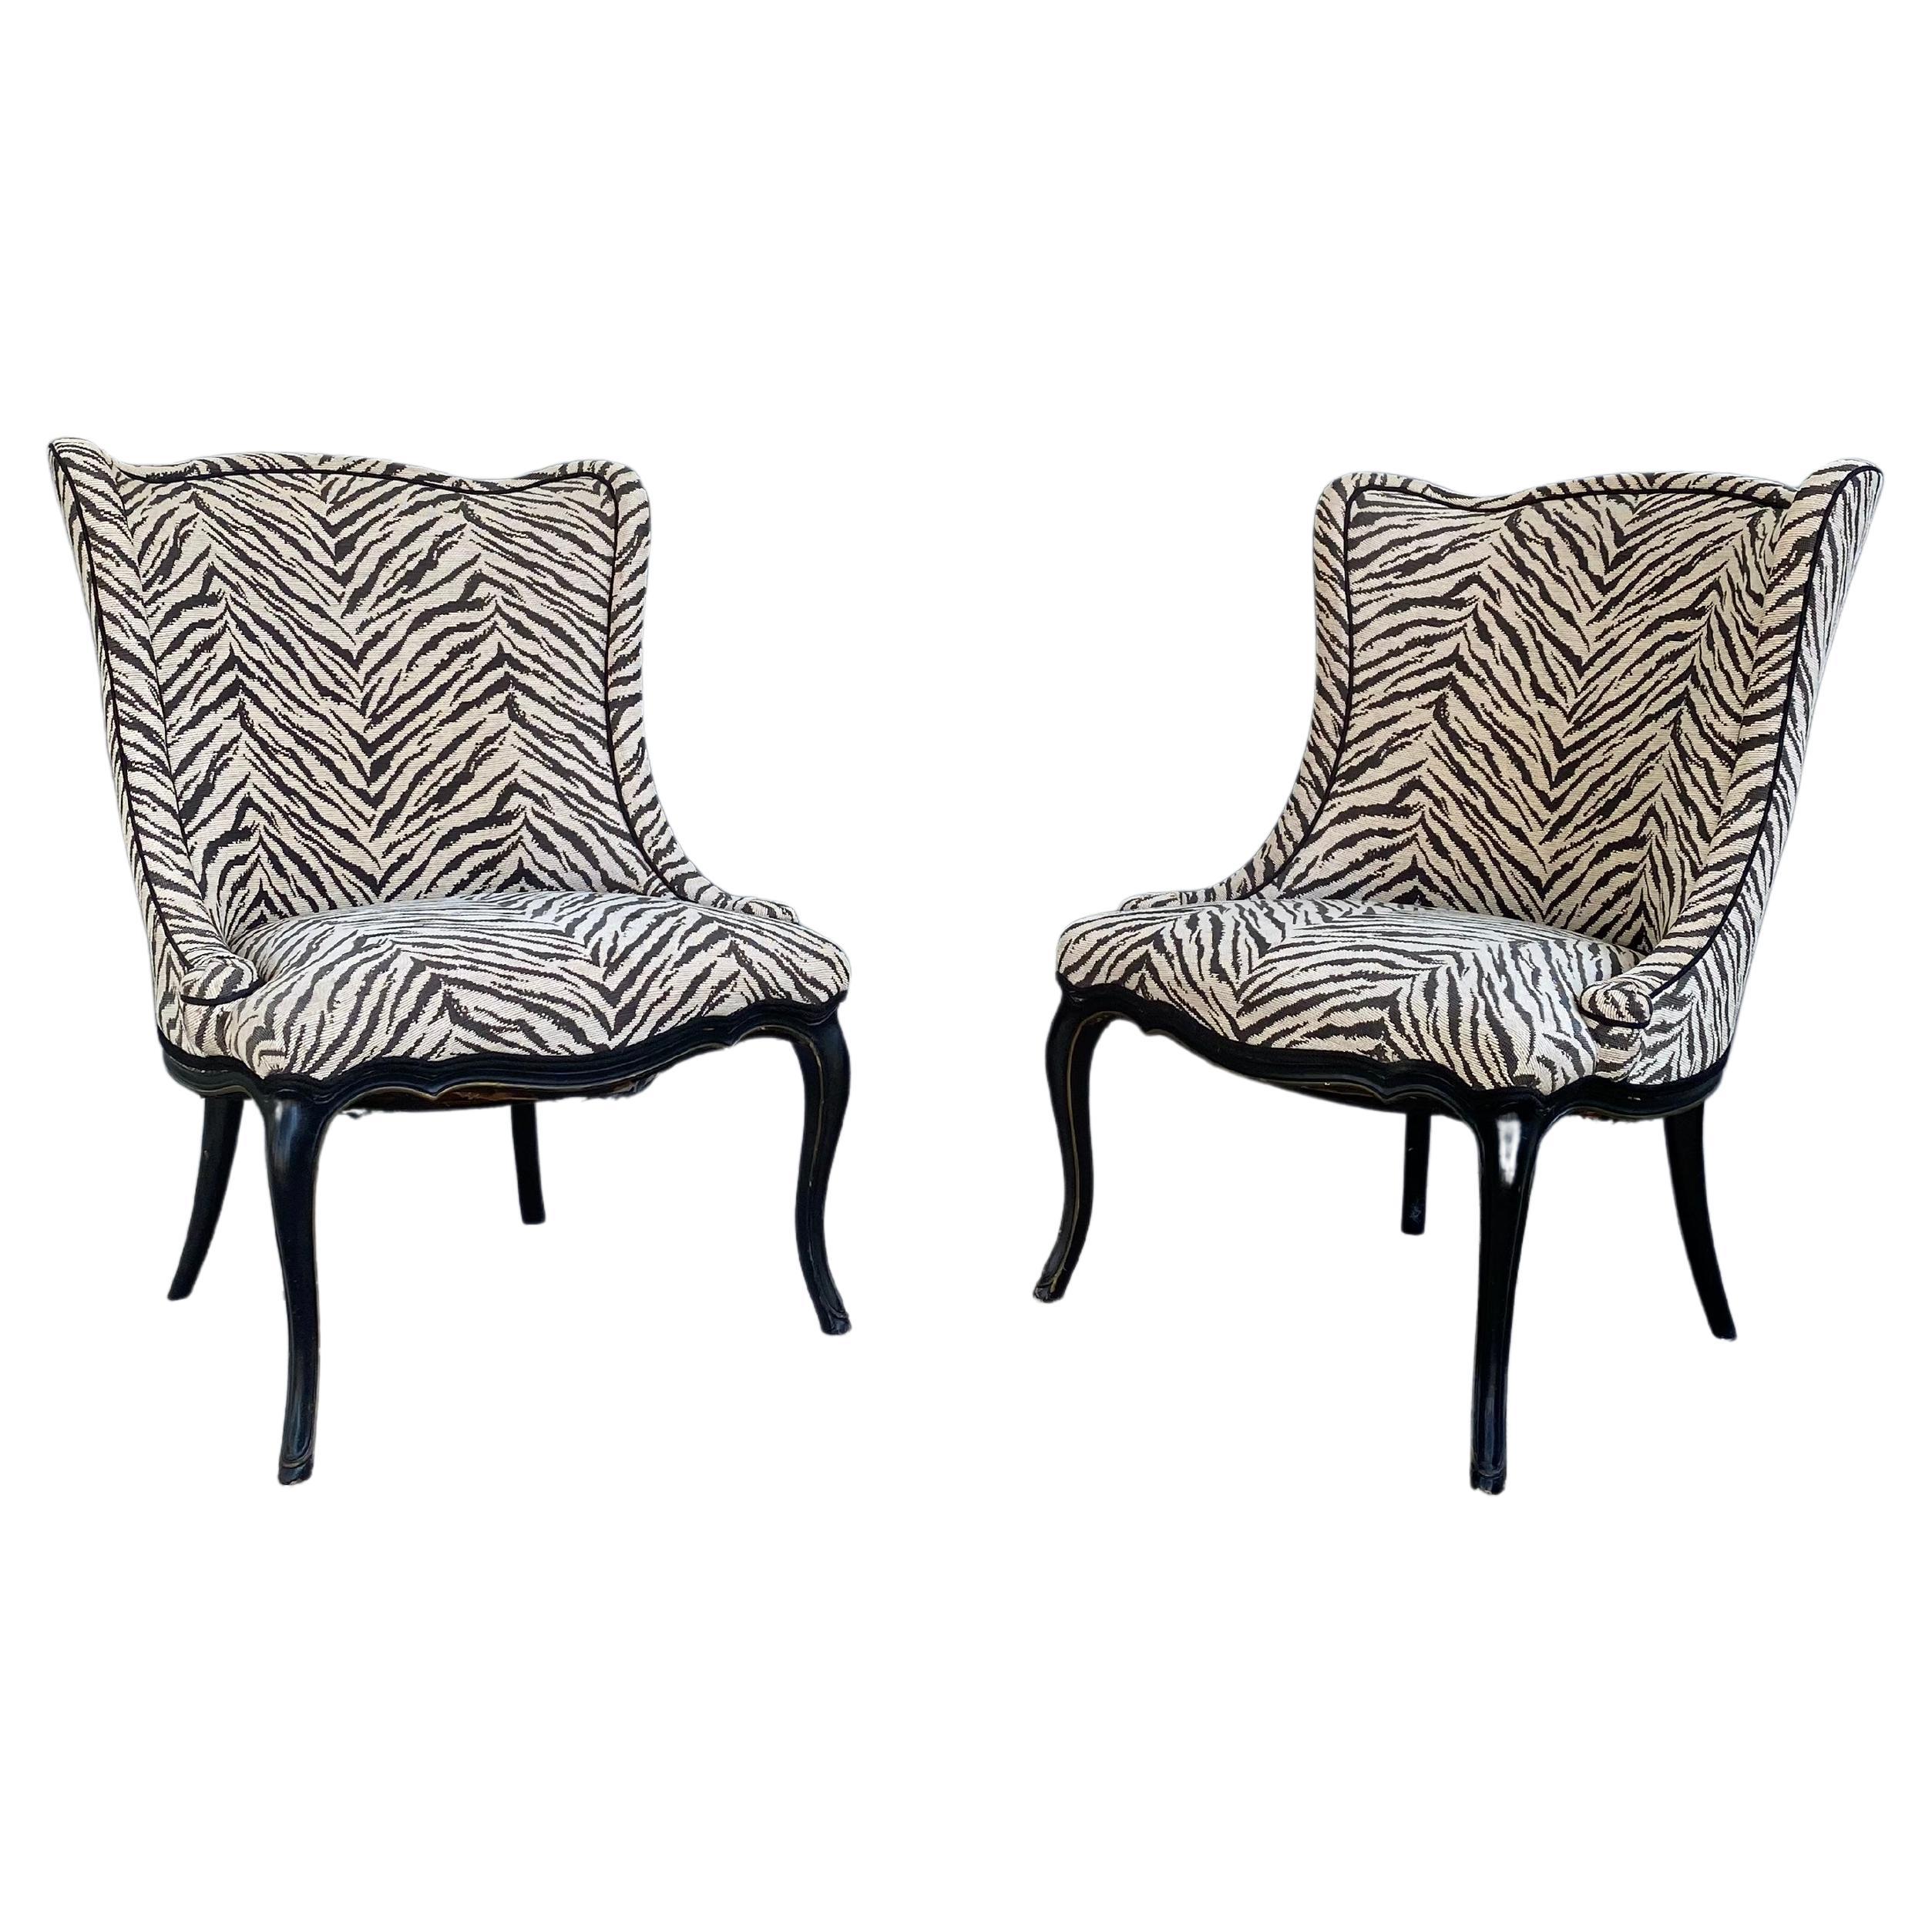 Queen Anne Wing Back Slipper Style Scalamandre Zebra Chairs, Set of 2 For Sale